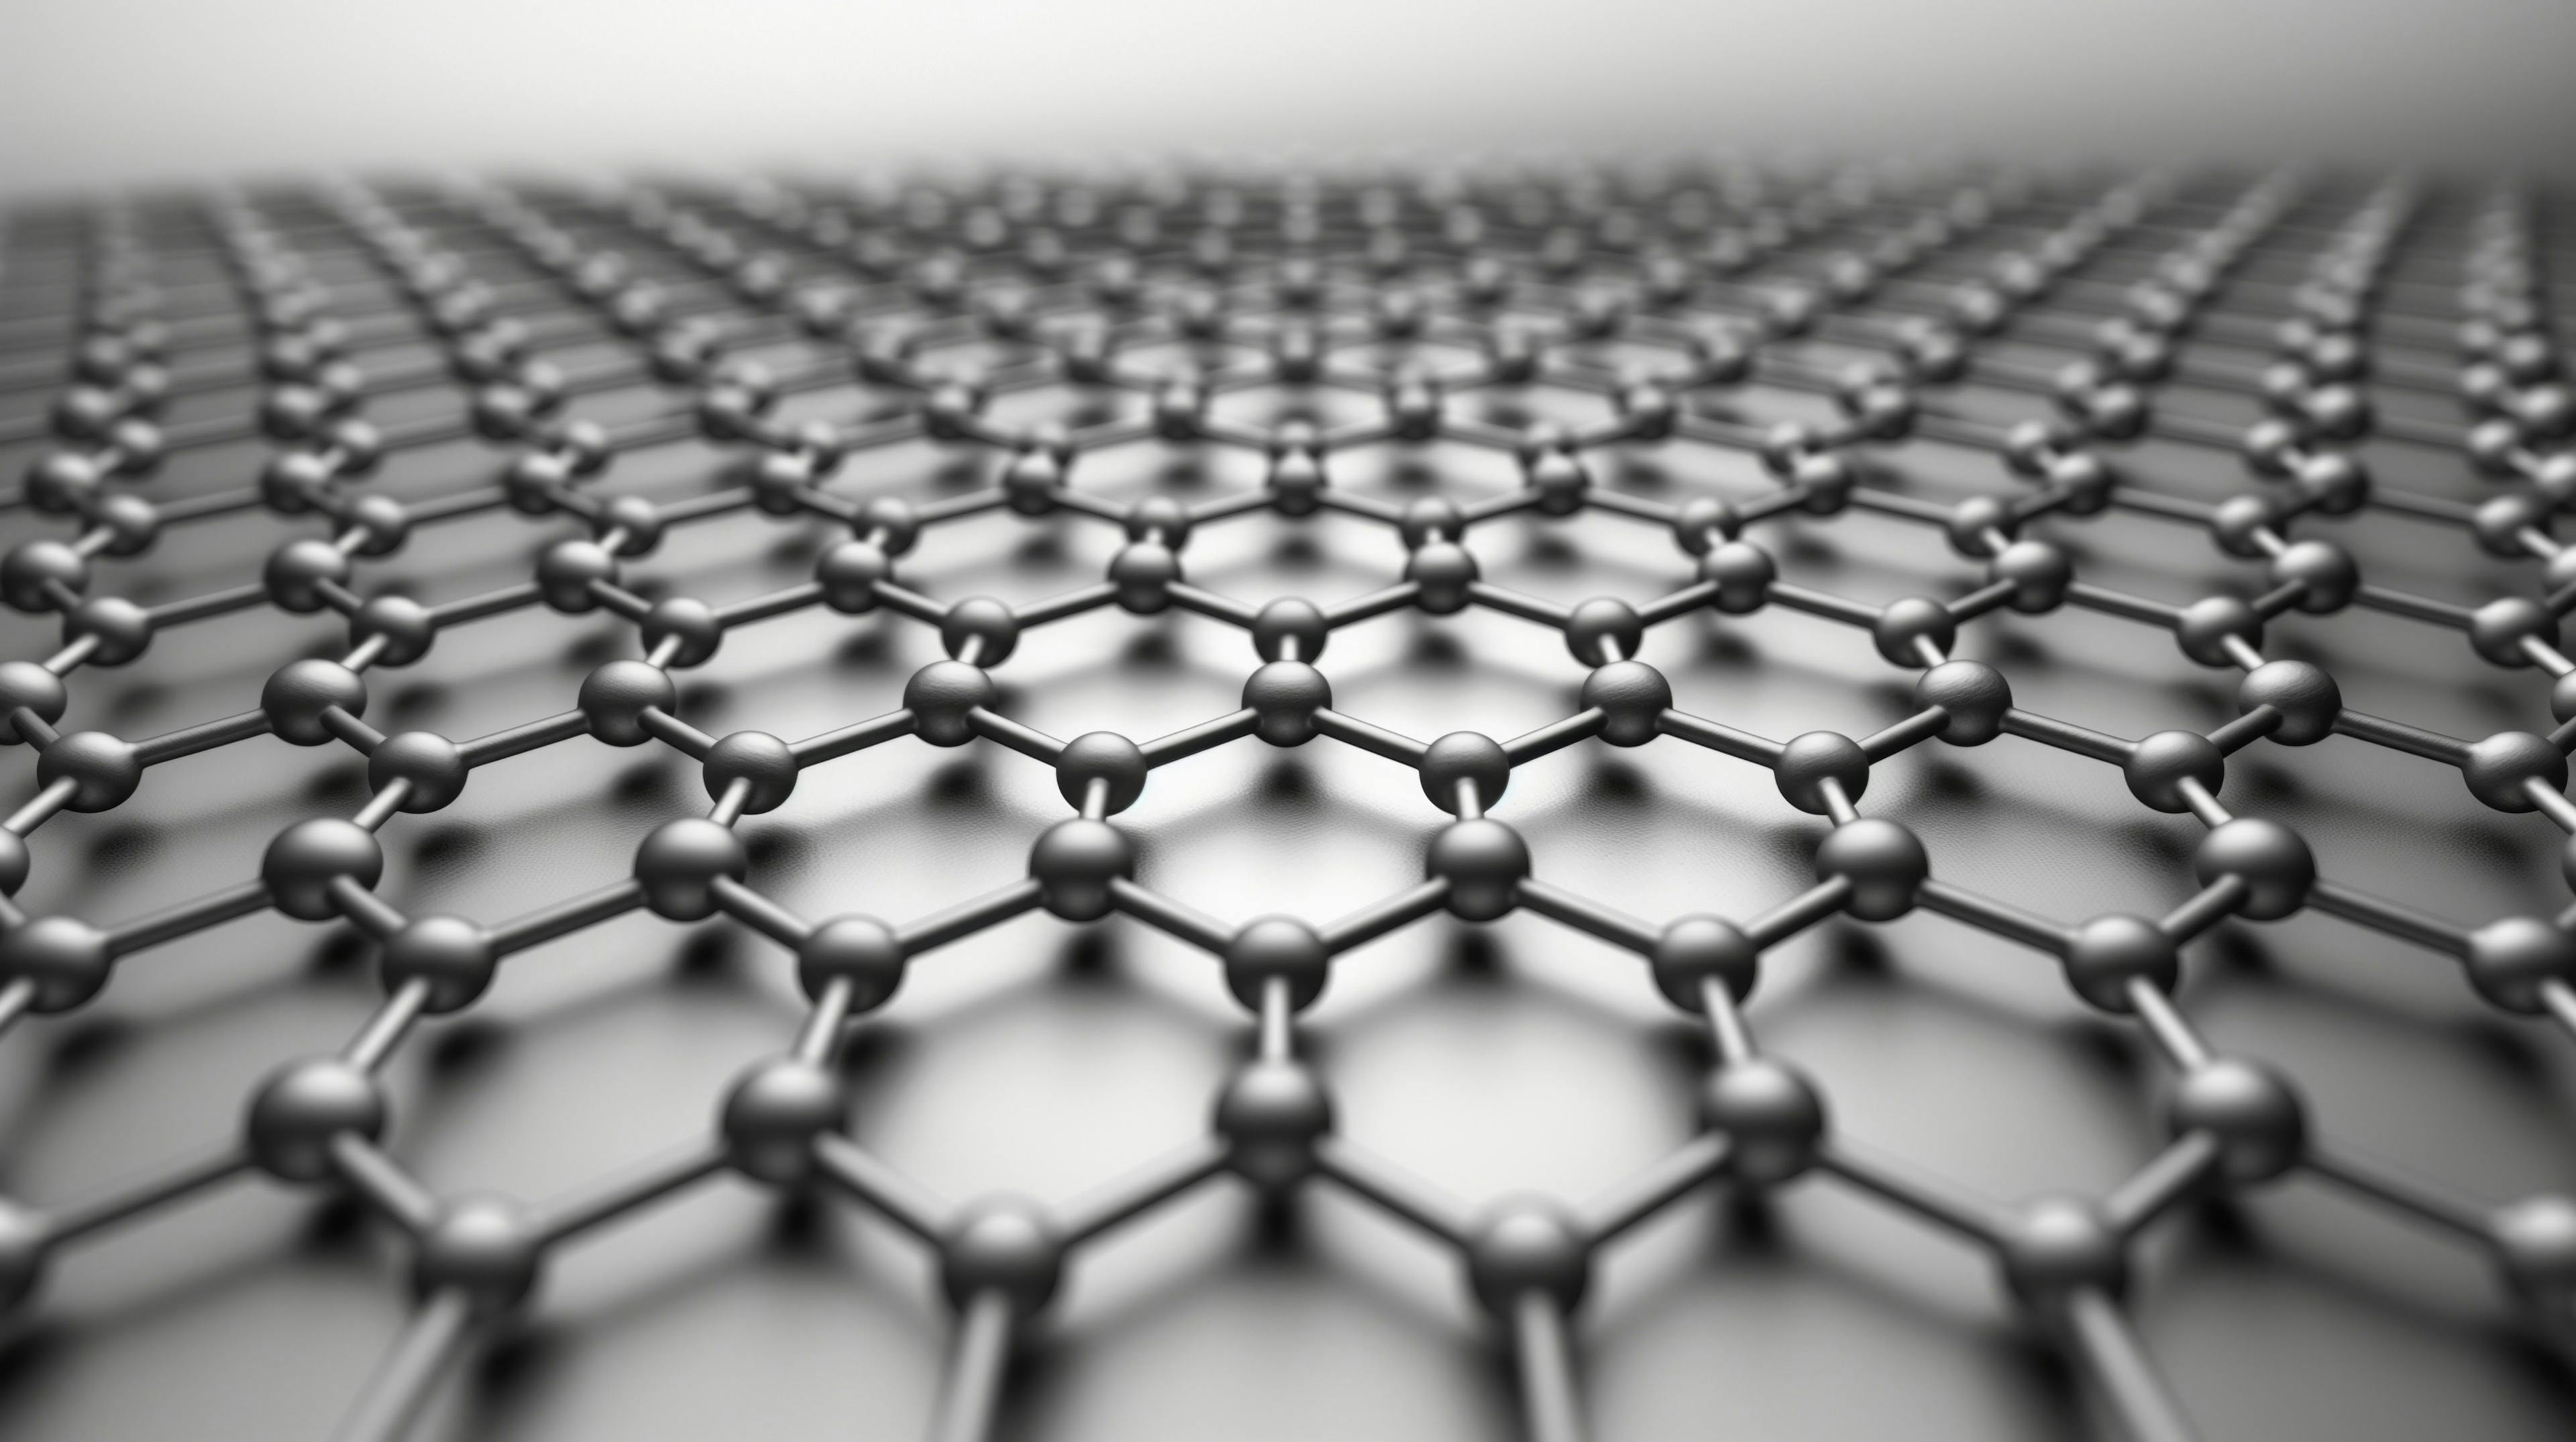 Close-up view of graphene sheet, illustrating its one-atom-thick layer of carbon atoms arranged in hexagonal lattice. | Image Credit: © unicusx - stock.adobe.com